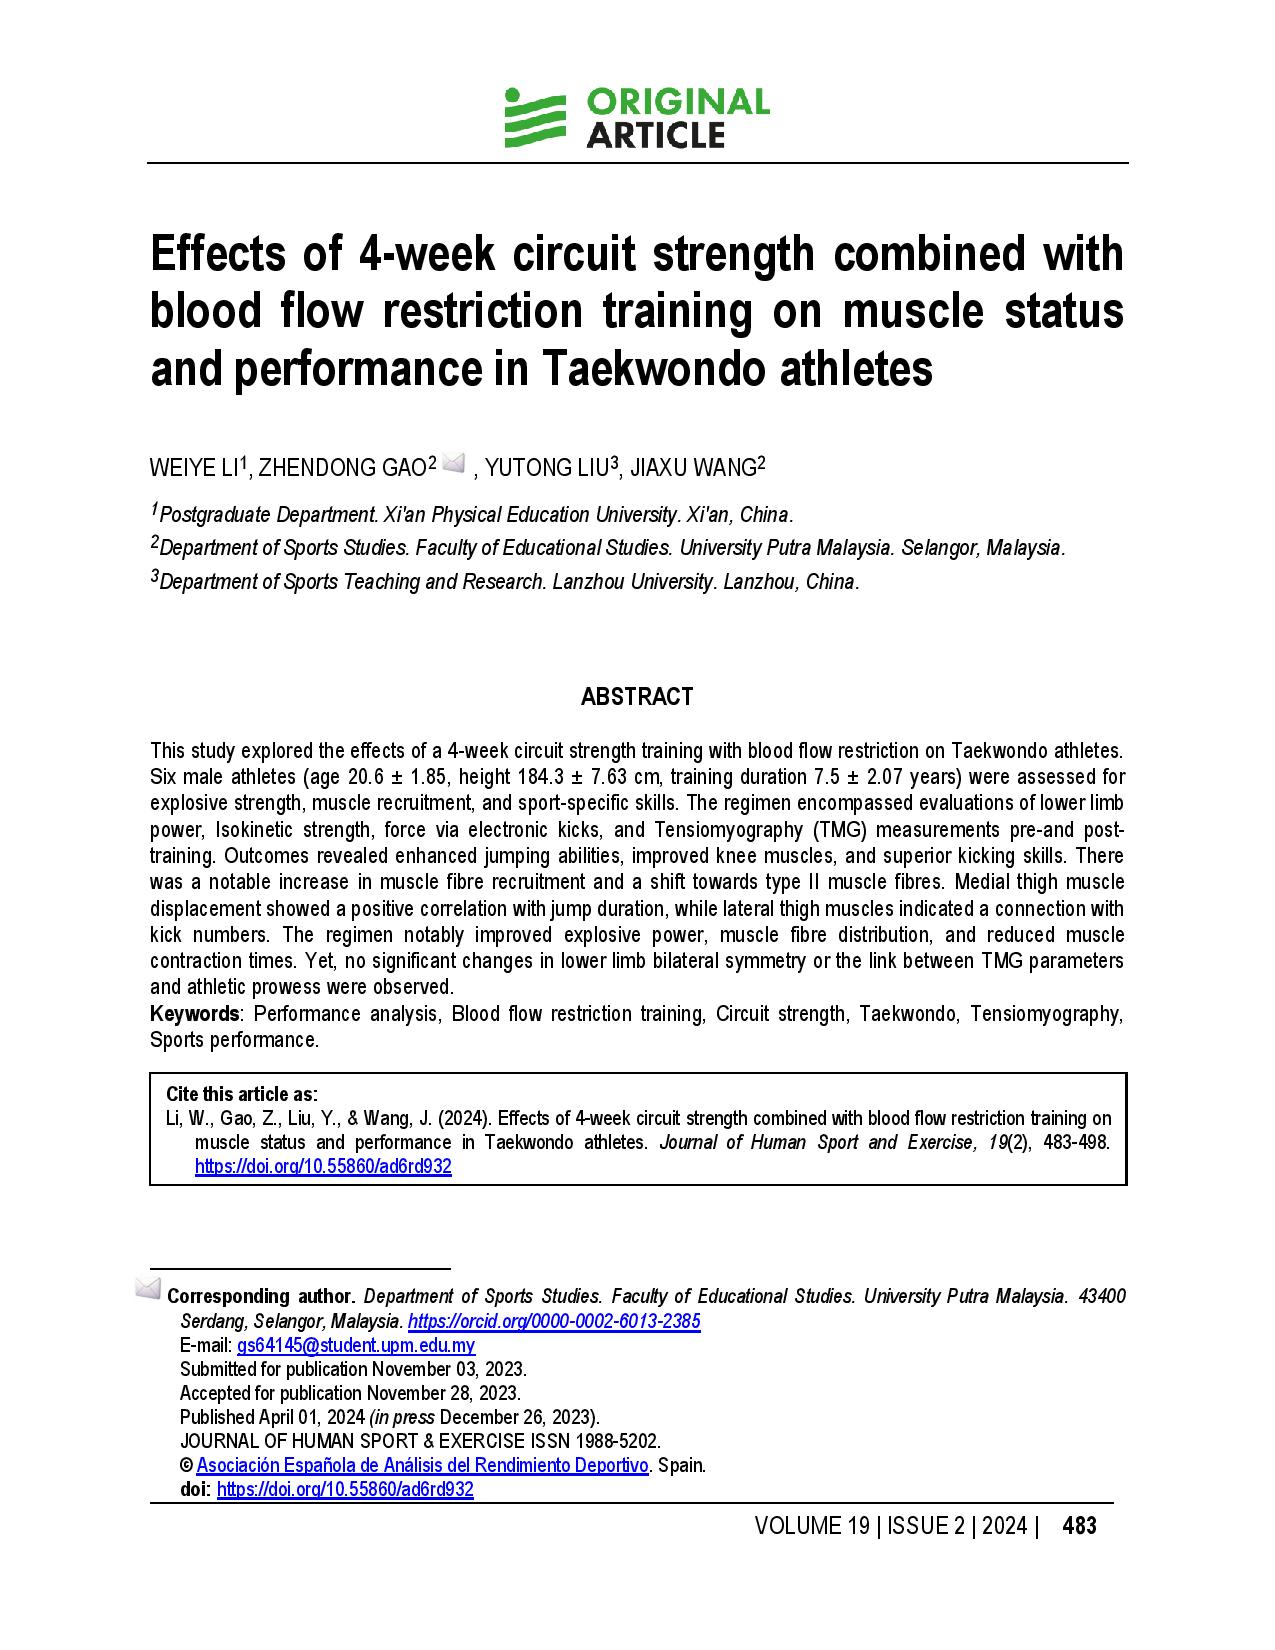 Effects of 4-week circuit strength combined with blood flow restriction training on muscle status and performance in Taekwondo athletes